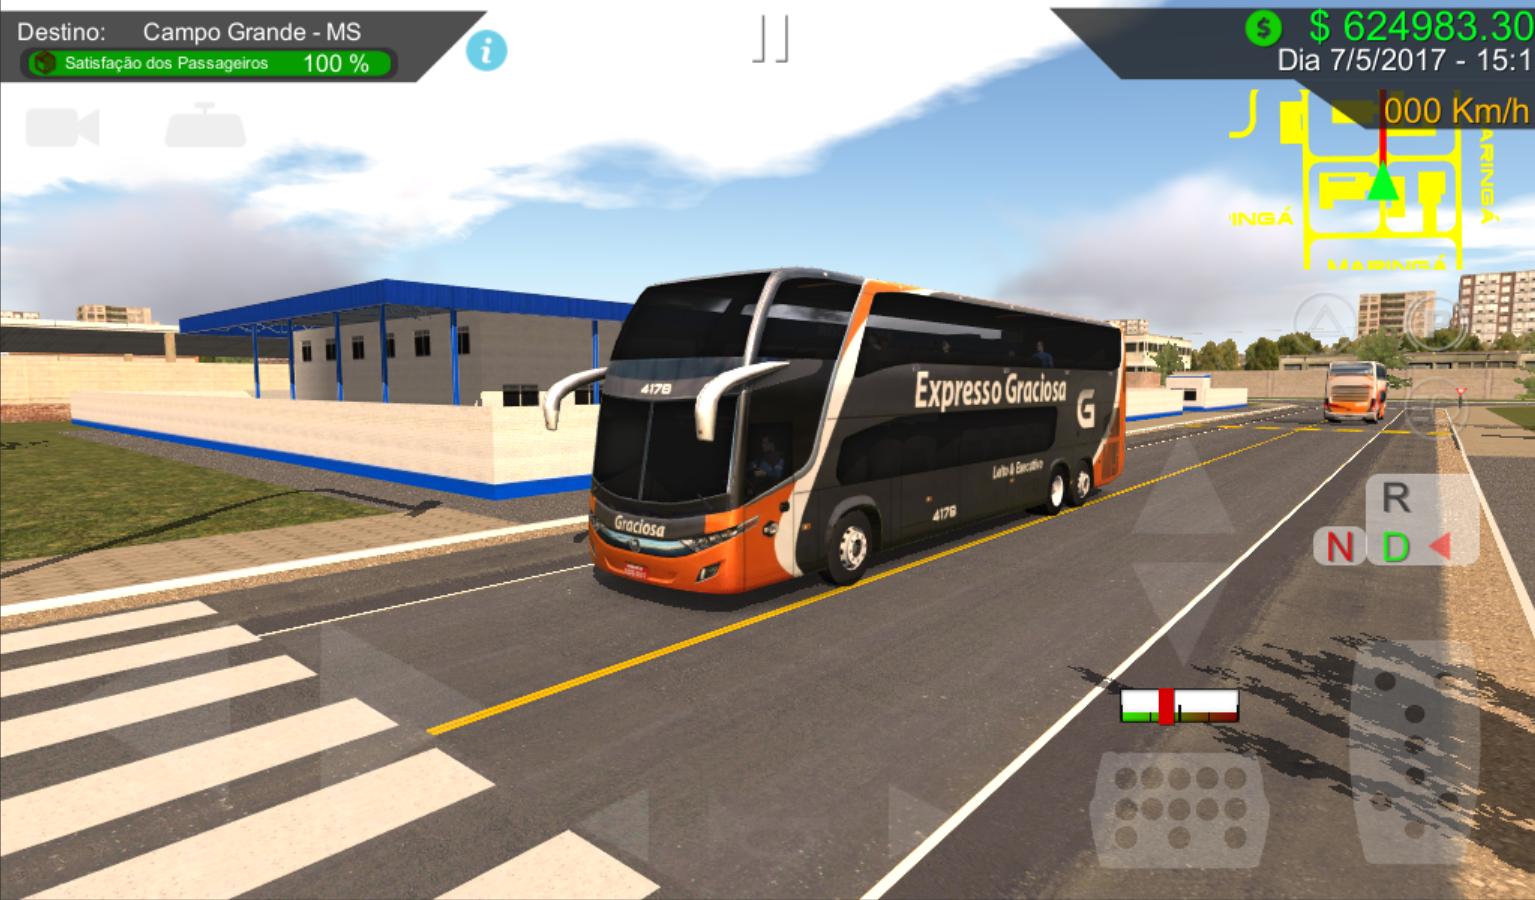 Heavy Bus Simulator for Android - APK Download - 